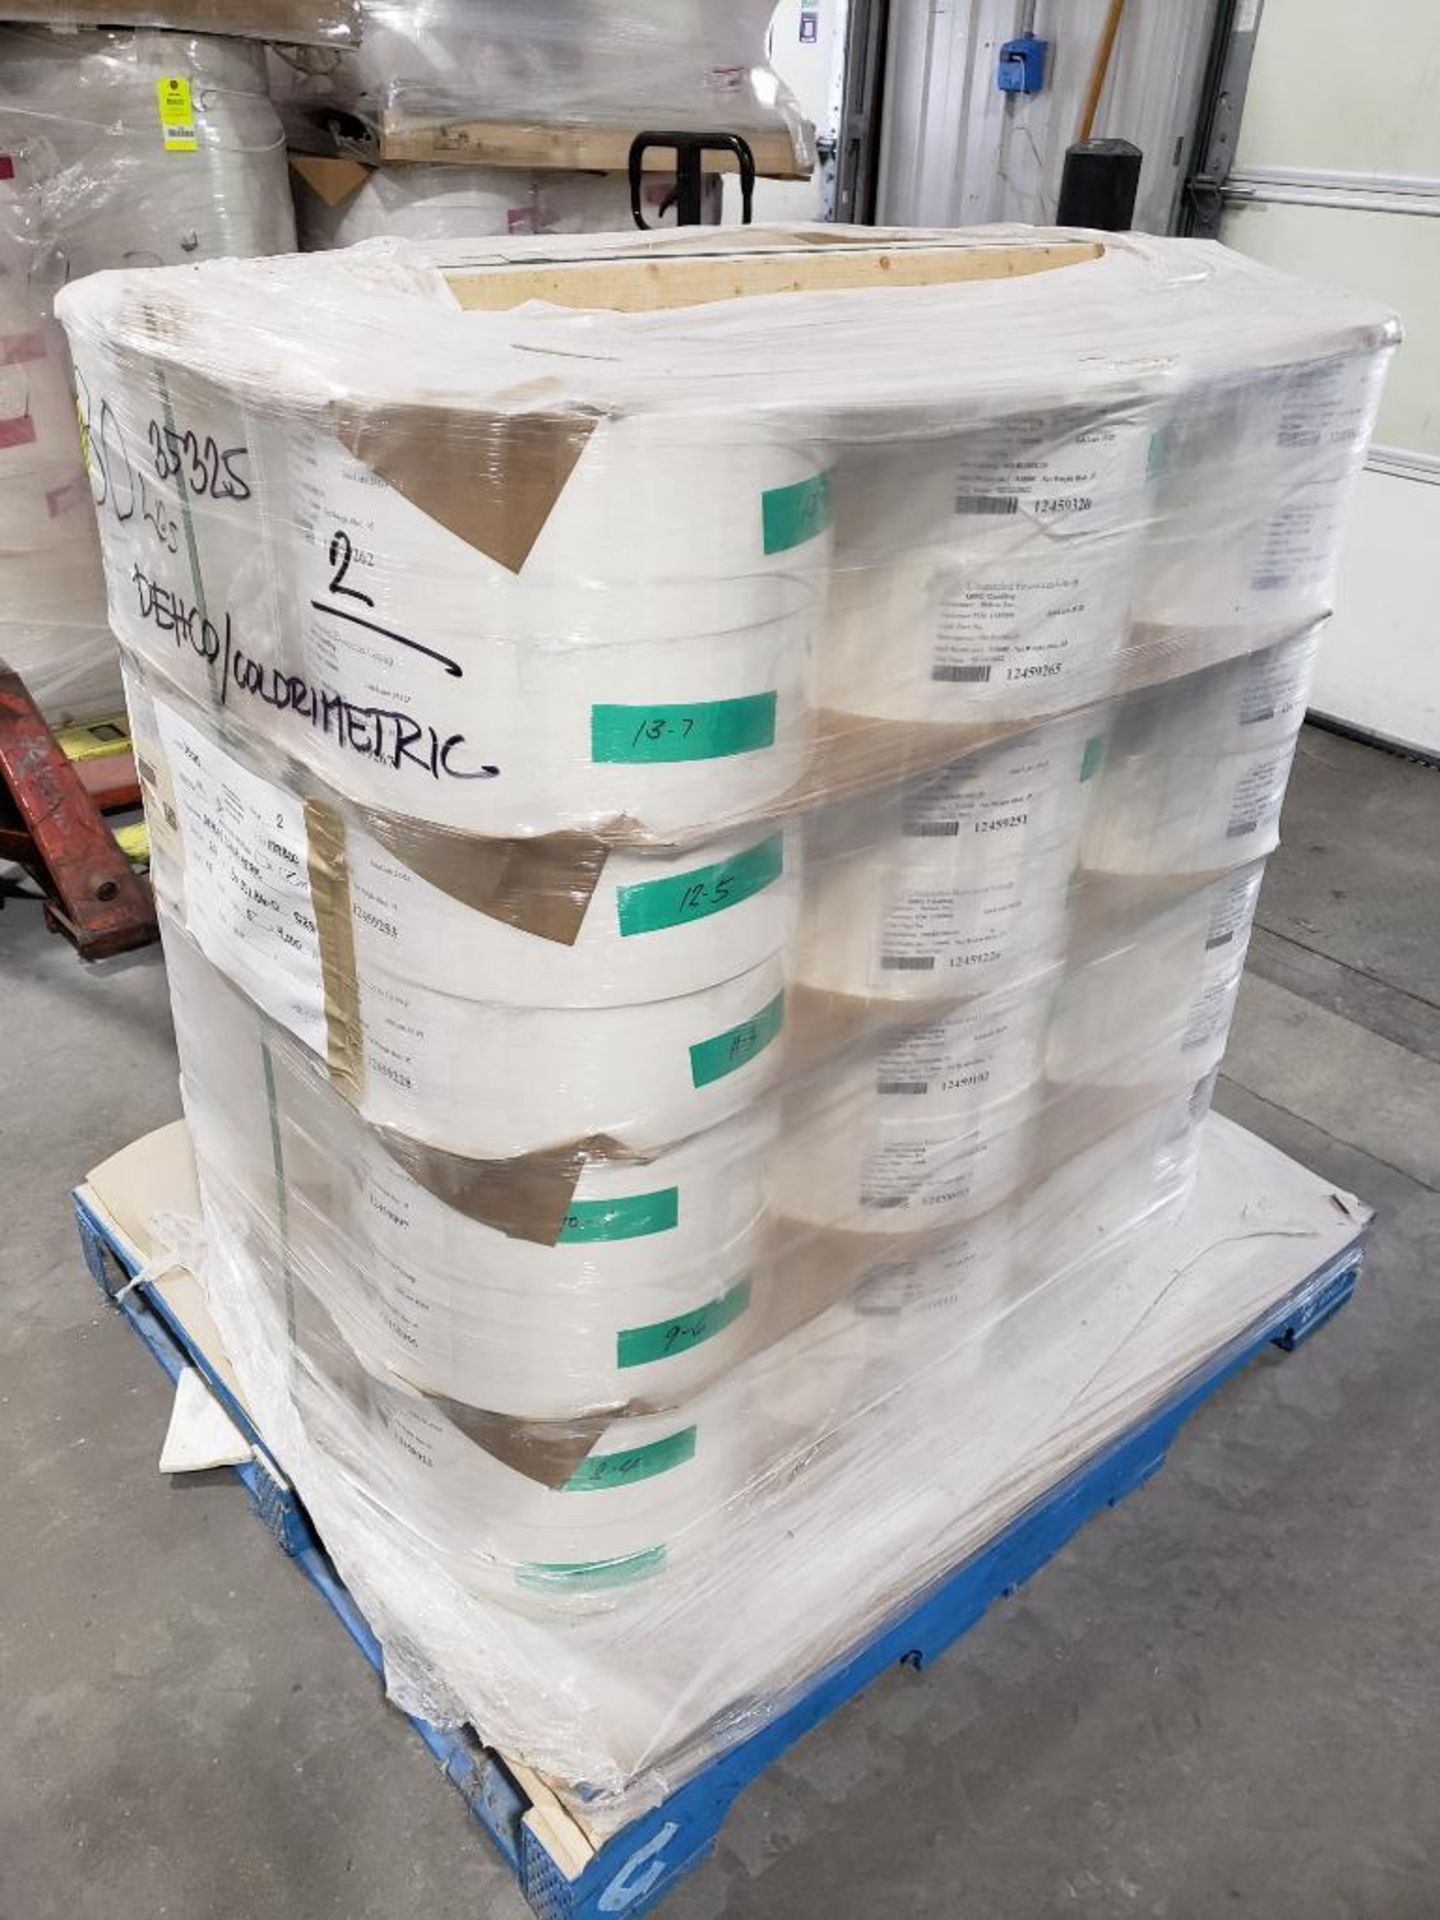 Pallet of backer paper. Large qty of rolls. Could be used for packing material. - Image 3 of 3